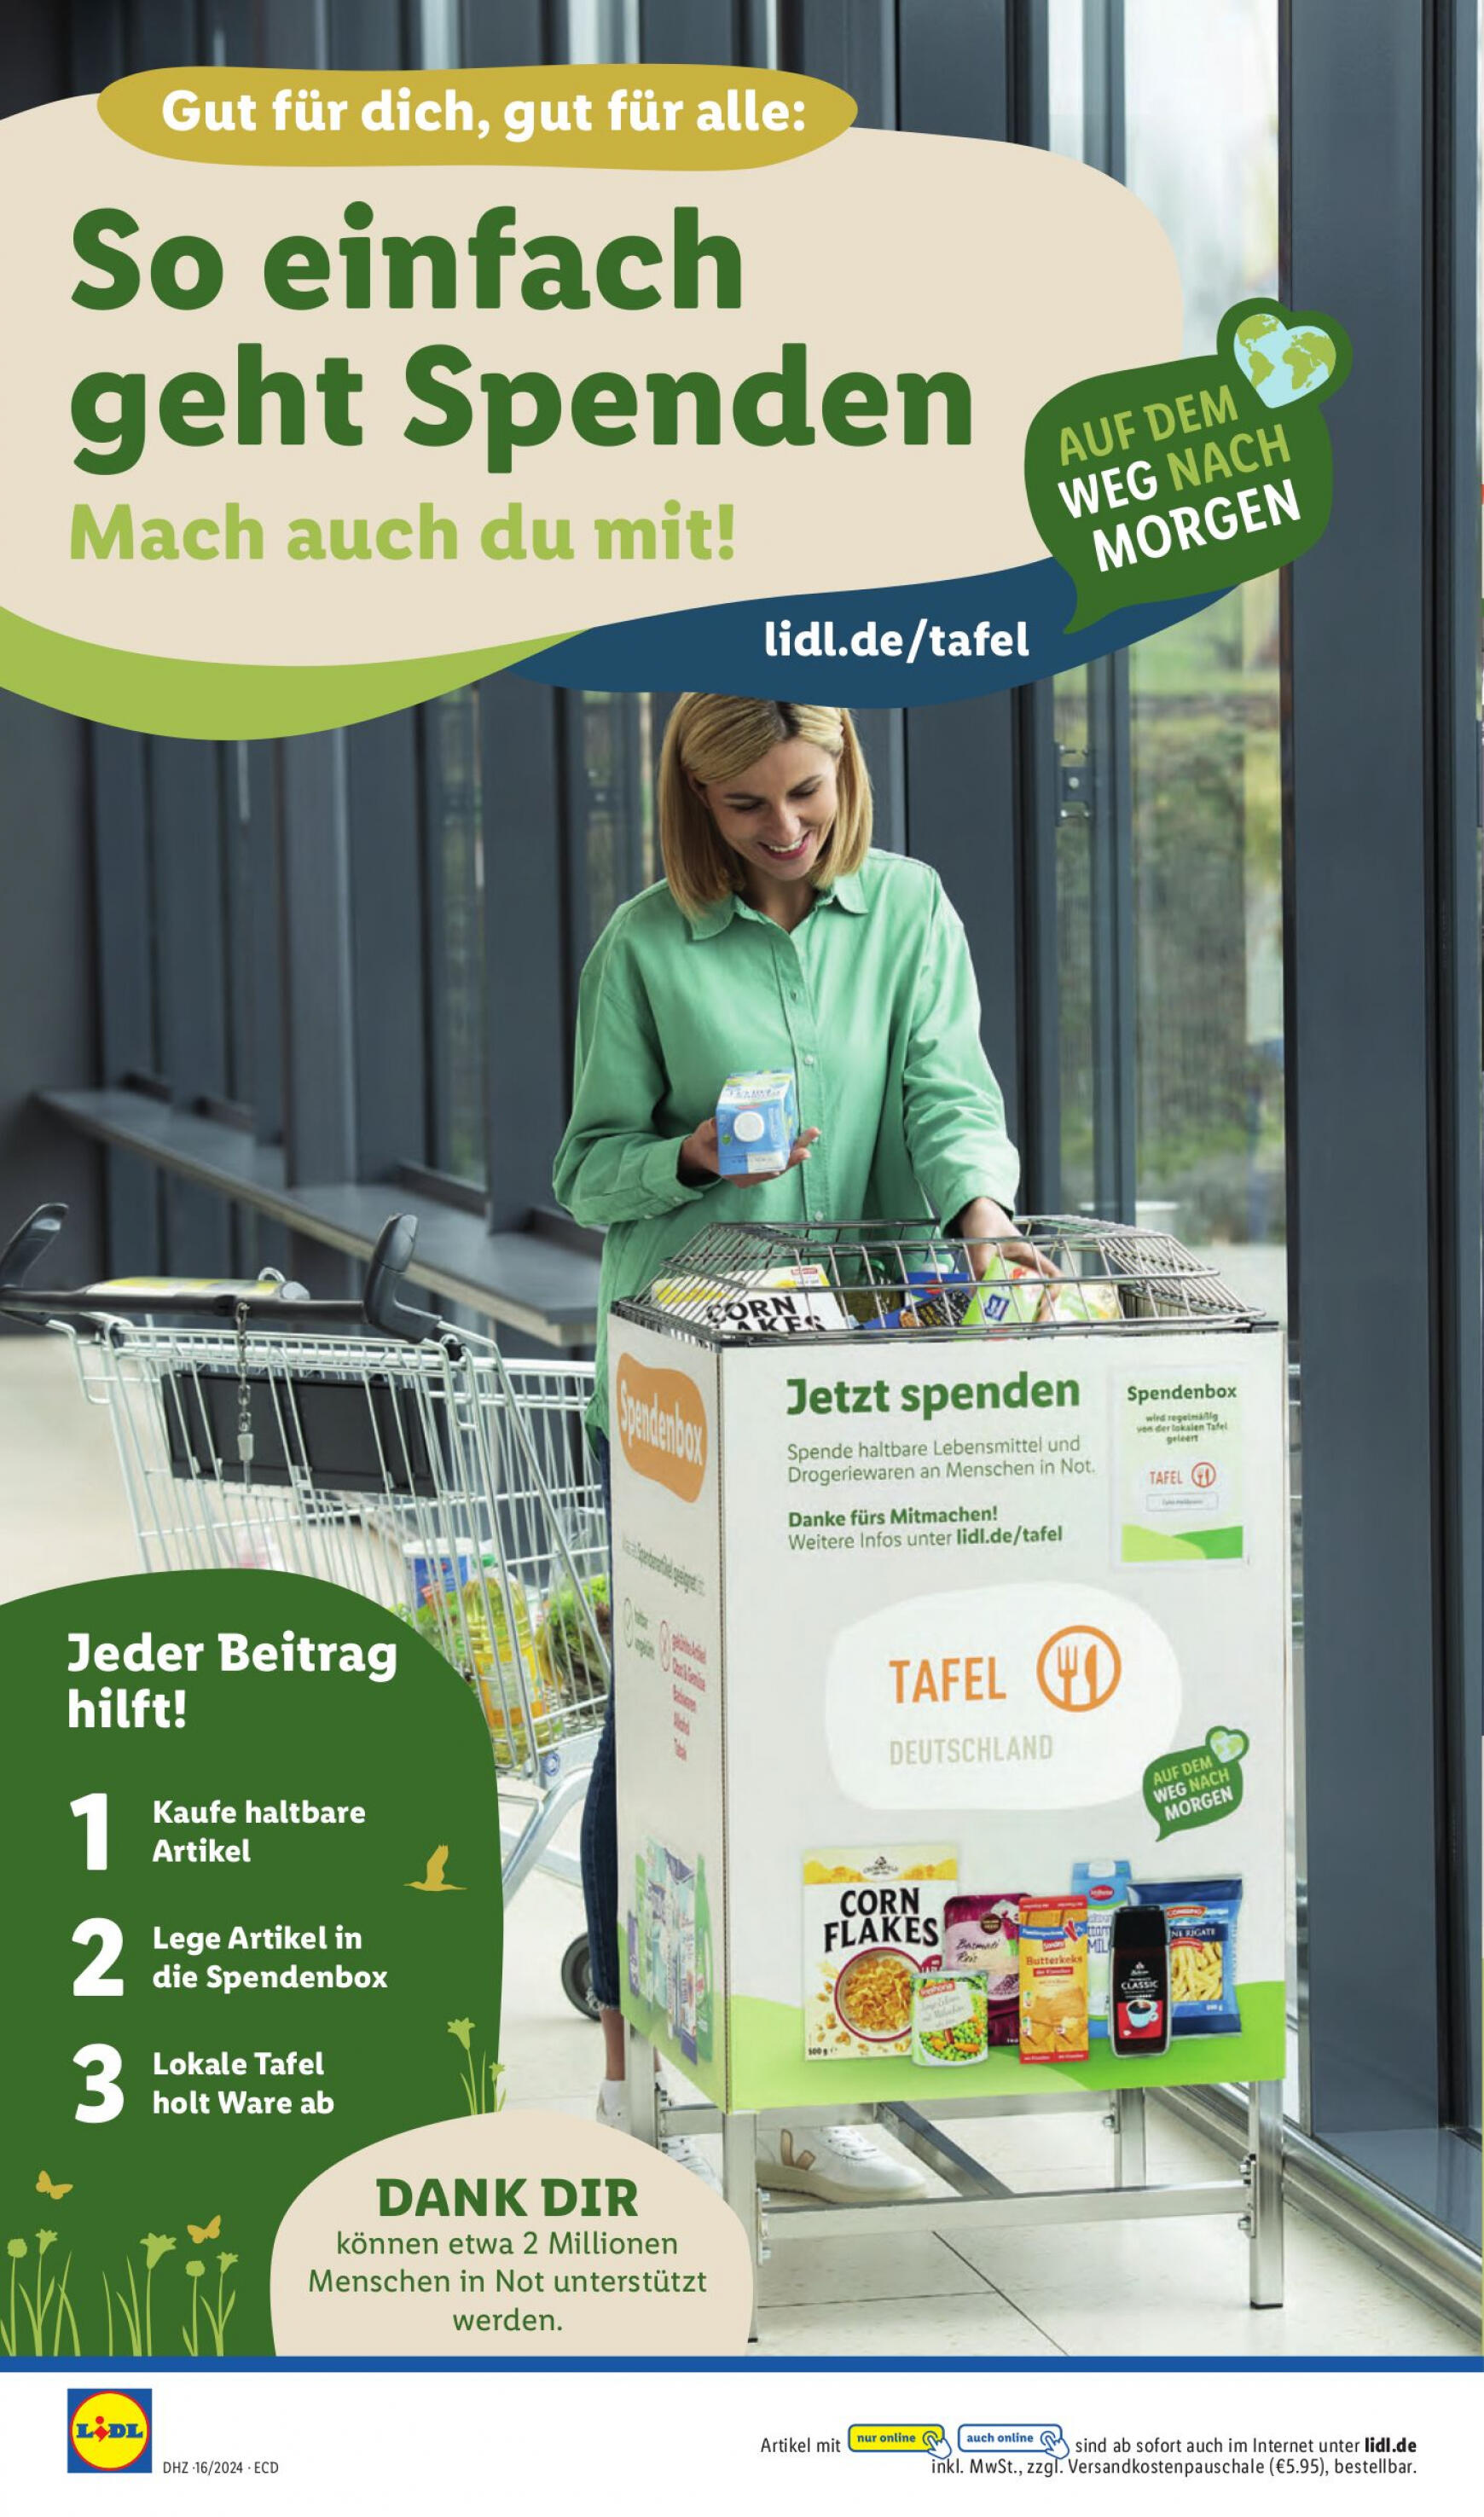 lidl - Flyer Lidl aktuell 15.04. - 20.04. - page: 58